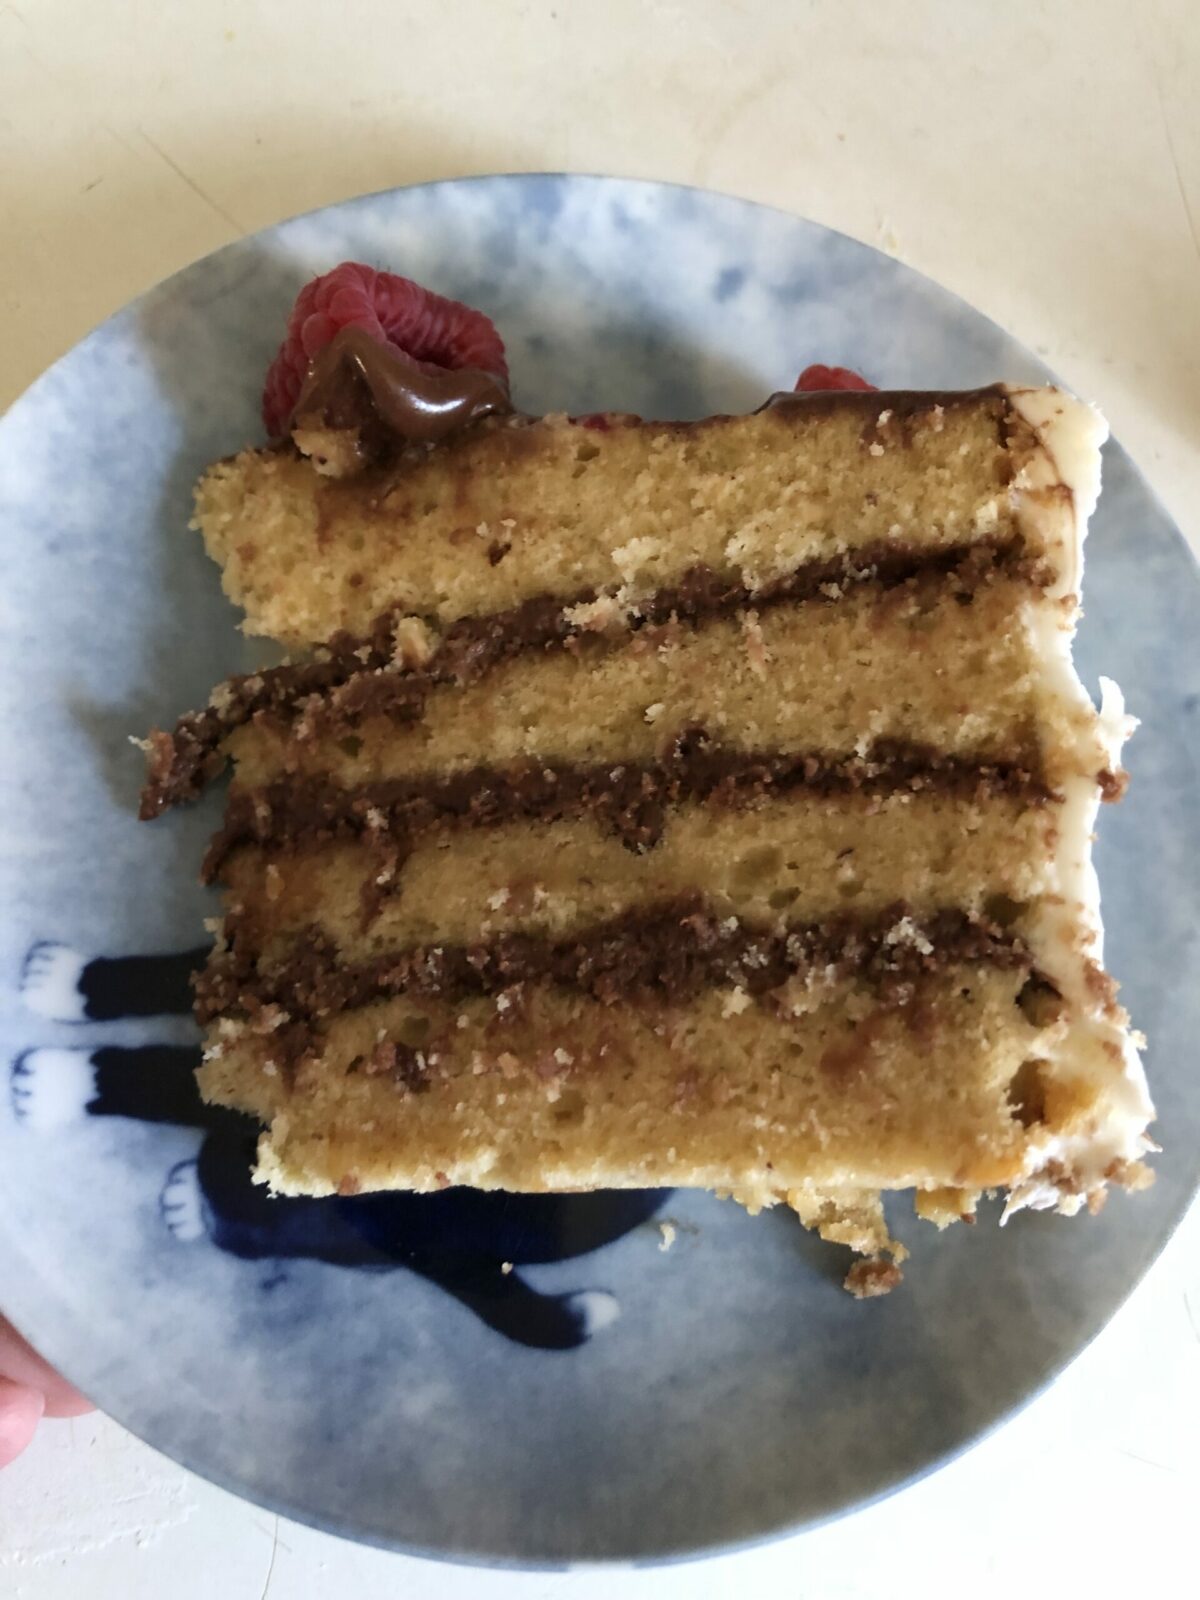 slice of nut cake with chocolate filling